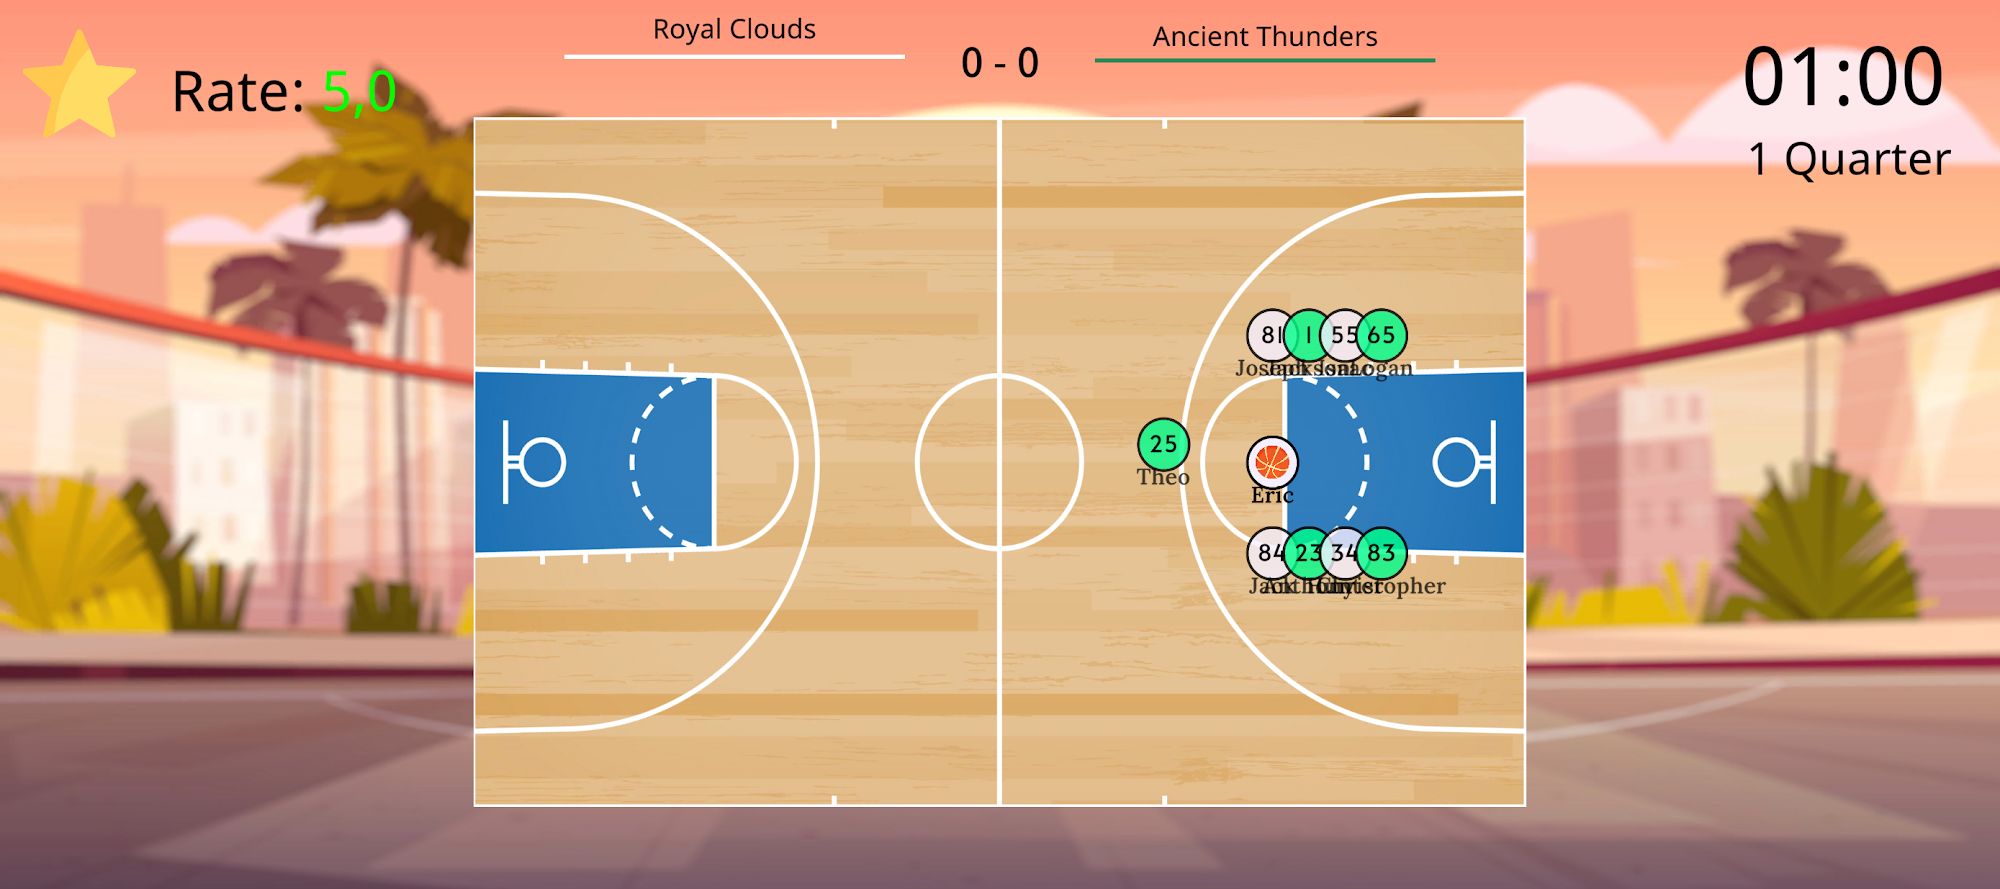 Gameplay of the Basketball Referee Simulator for Android phone or tablet.